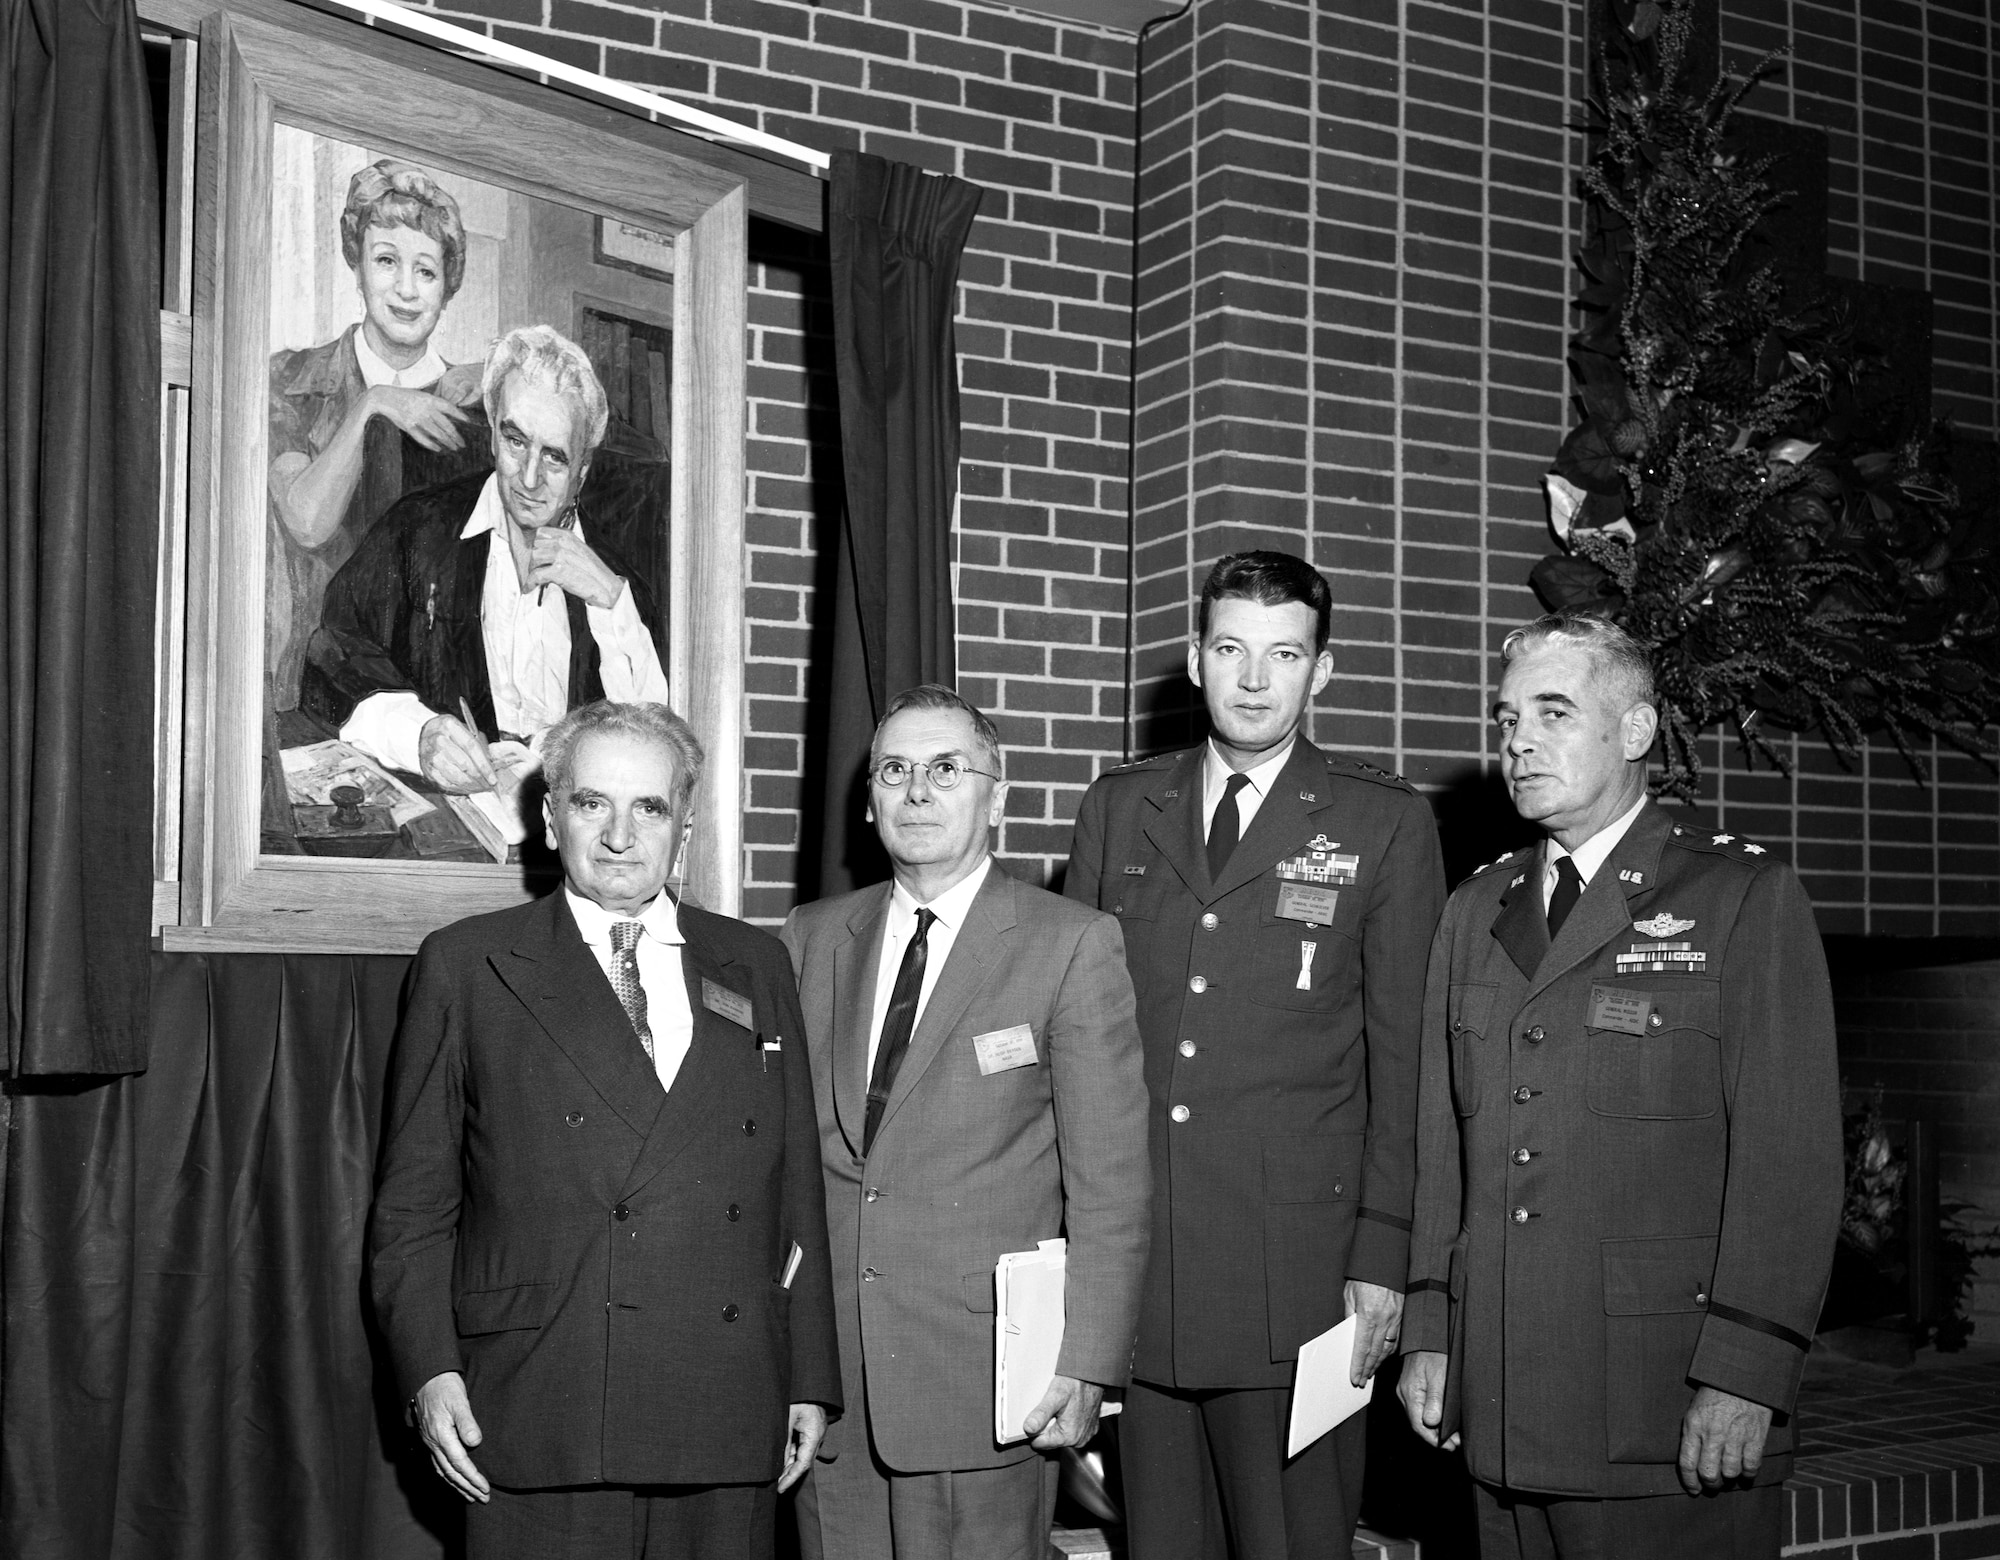 Dr. Theodore von Kármán; Dr. Hugh Dryden, then-deputy administrator of the National Aeronautics and Space Administration; then-Lt. Gen. Bernard Schriever, then-commander of the Air Research and Development Command; and then-Maj. Gen. Troup Miller Jr., then-commander of Arnold Engineering Development Center, from left, pose for a photo below a portrait of von Kármán and his sister Dr. Josephine de Kármán as part of the events surrounding the Oct. 30, 1959, dedication of the Gas Dynamics Facility at Arnold Air Force Base, Tenn., in honor of von Kármán. (U.S. Air Force photo)